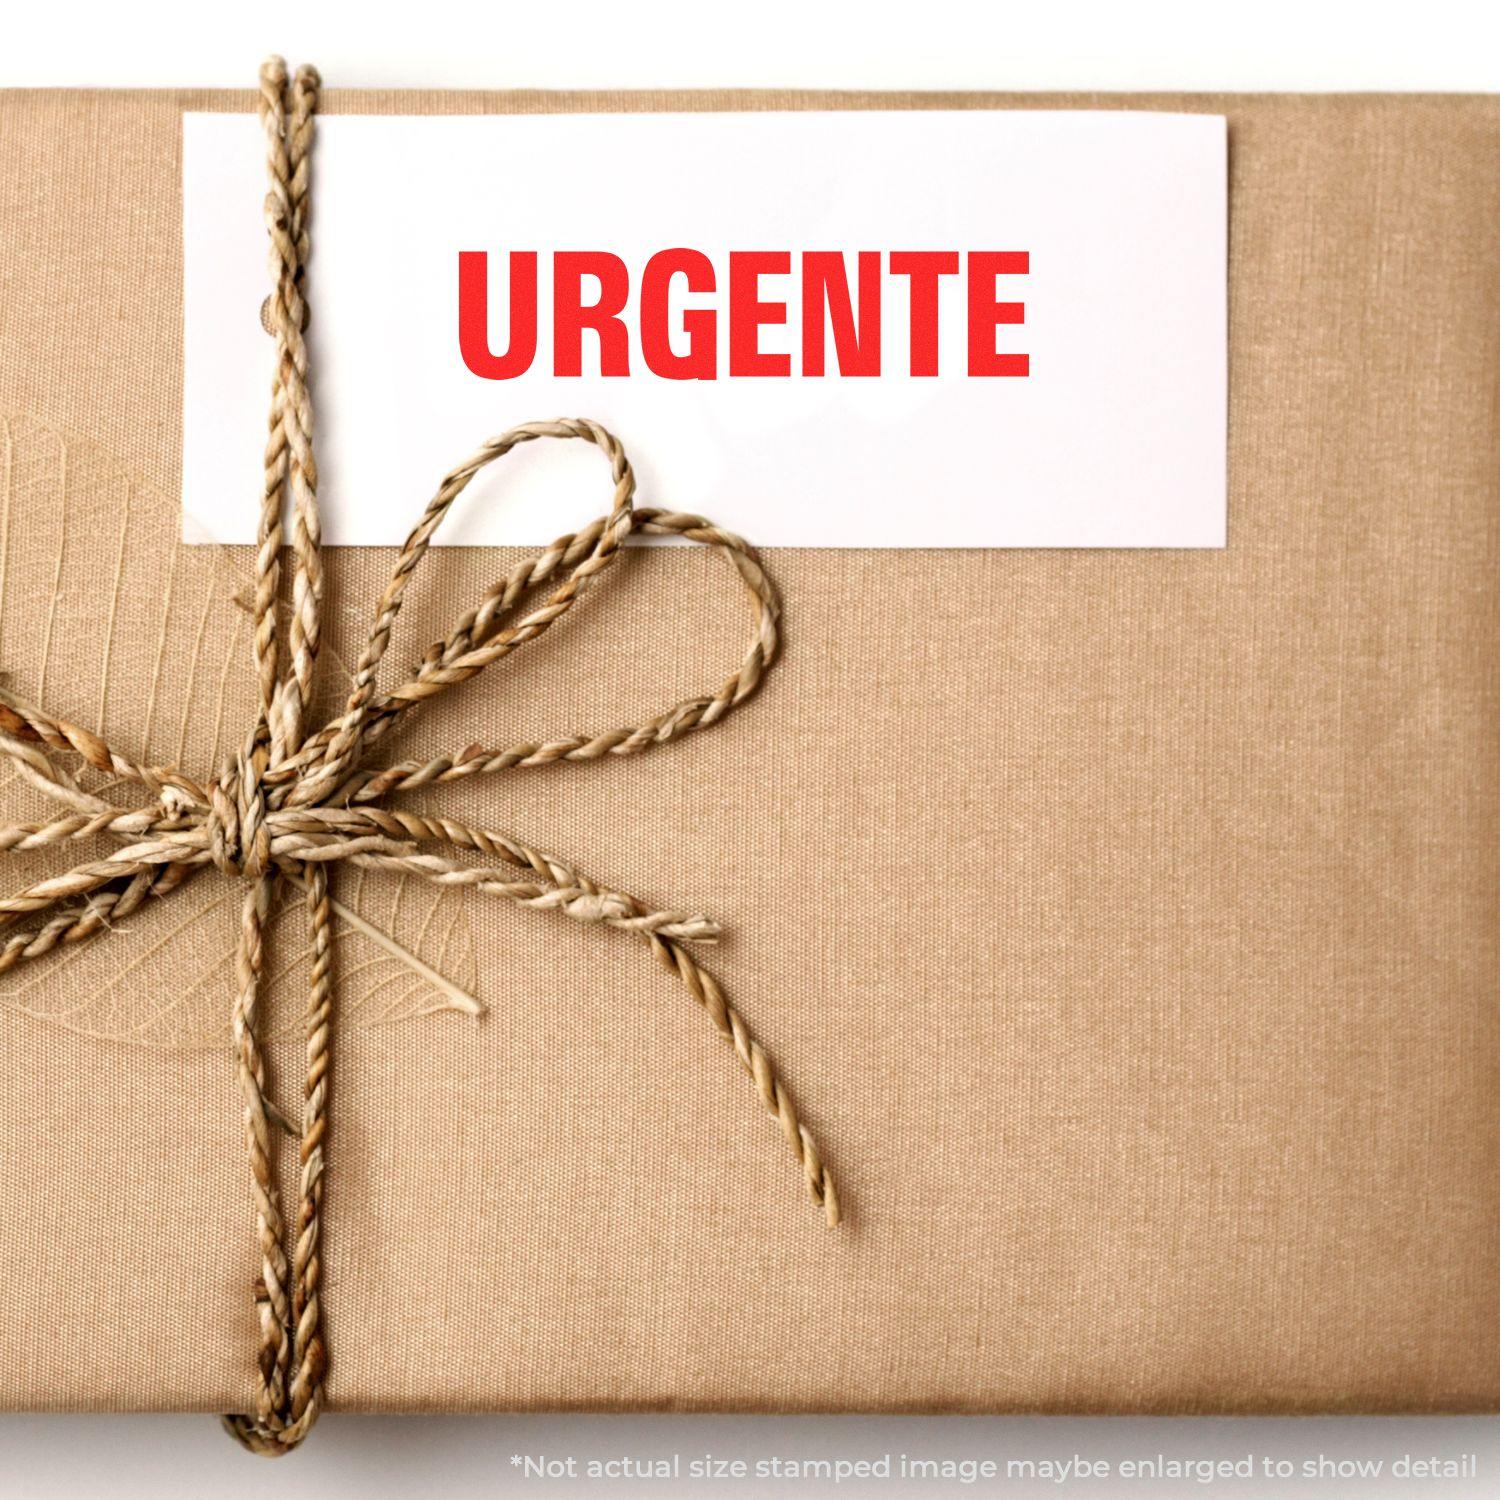 A stock office rubber stamp with a stamped image showing how the text "URGENTE" in a large font is displayed after stamping.